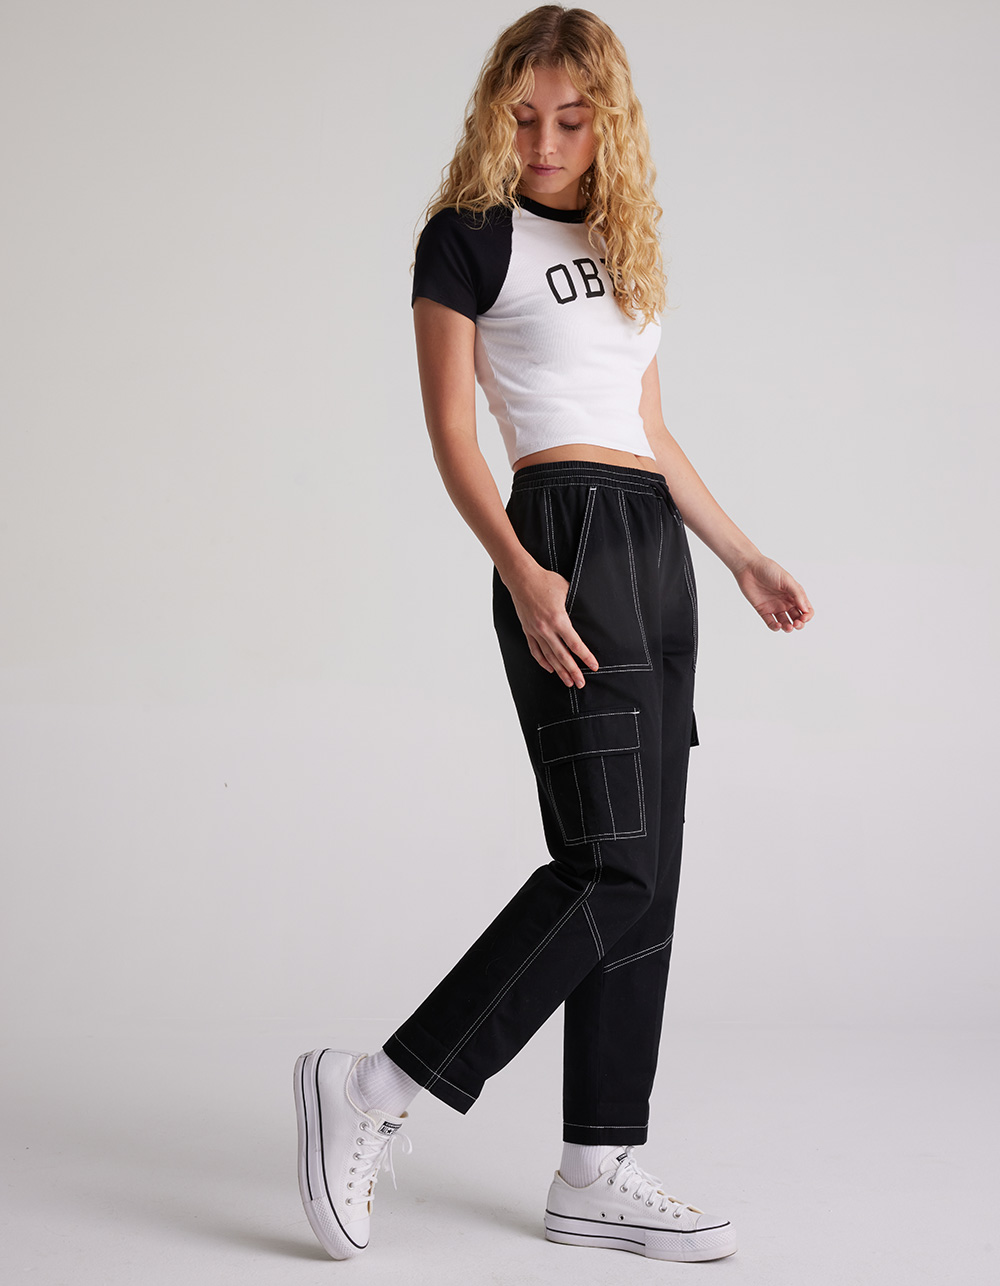 Ebay Lululemon Abc Pants For Women | International Society of Precision  Agriculture